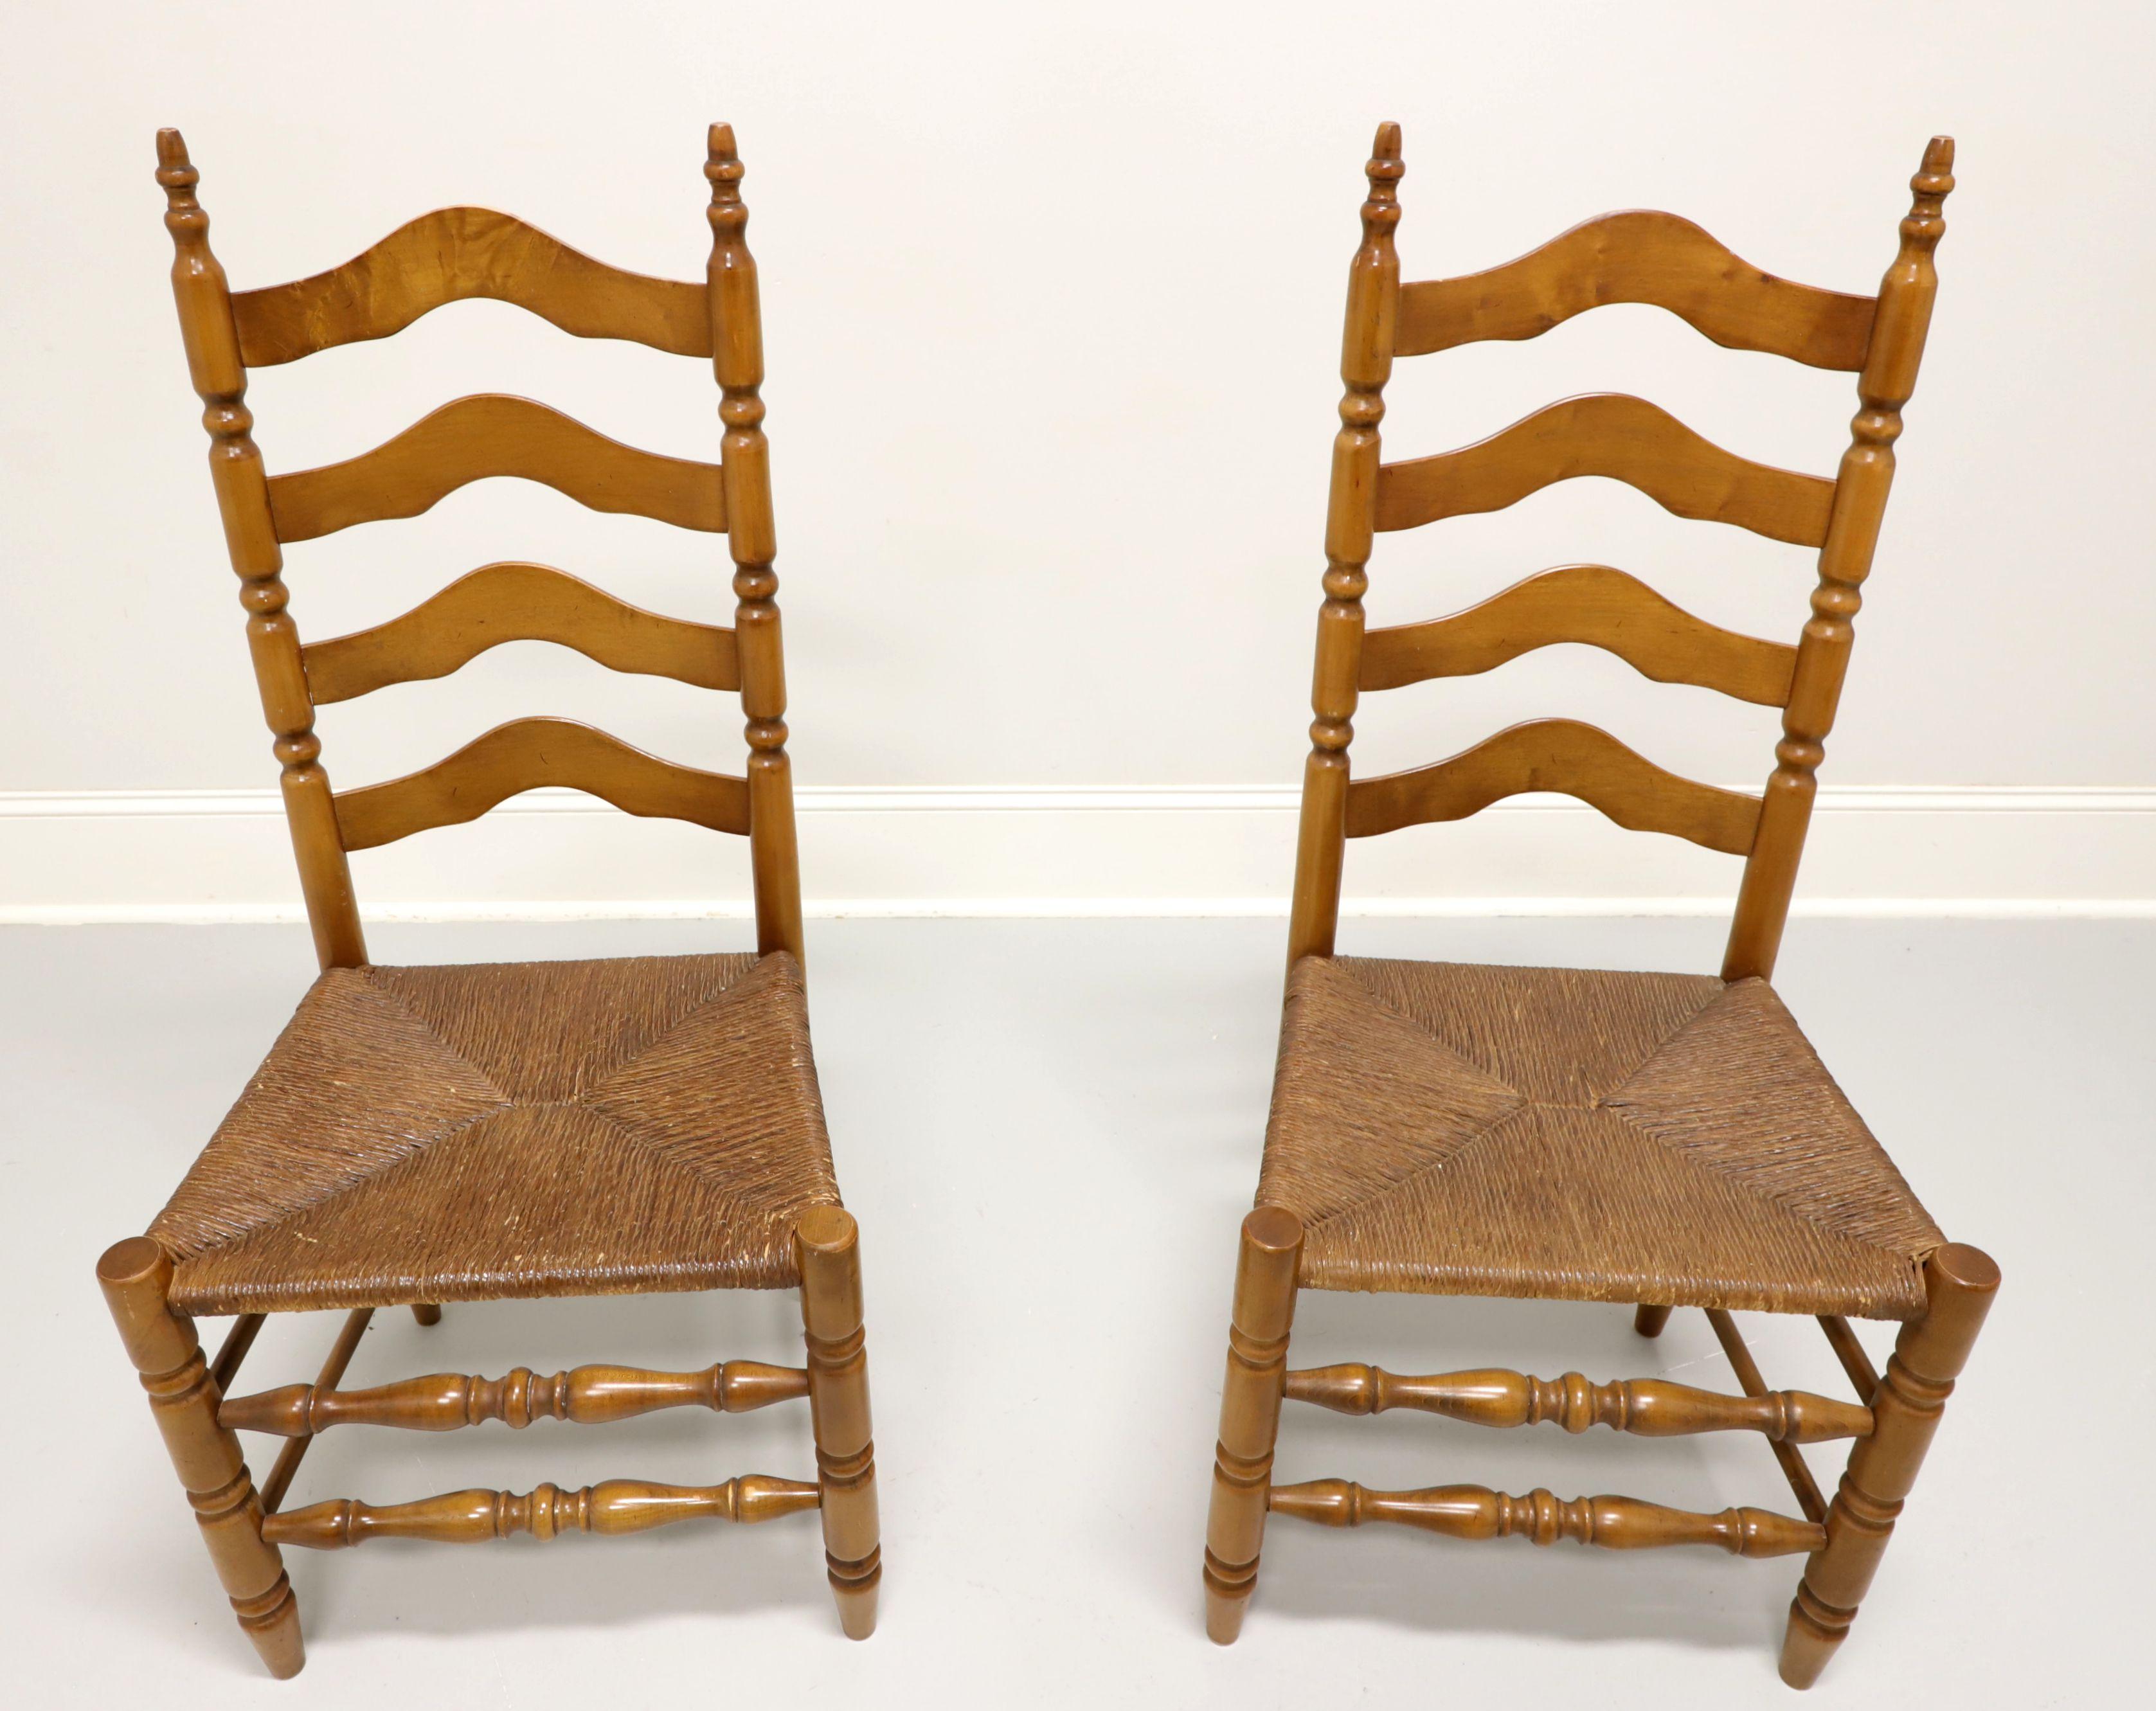 A pair of Cottage / Farmhouse style dining side chairs, unbranded, similar in quality to Ethan Allen. Maple with carved arched ladder back design, rush seats, turned front legs & front stretchers, and solid back legs & back/side stretchers. Made in